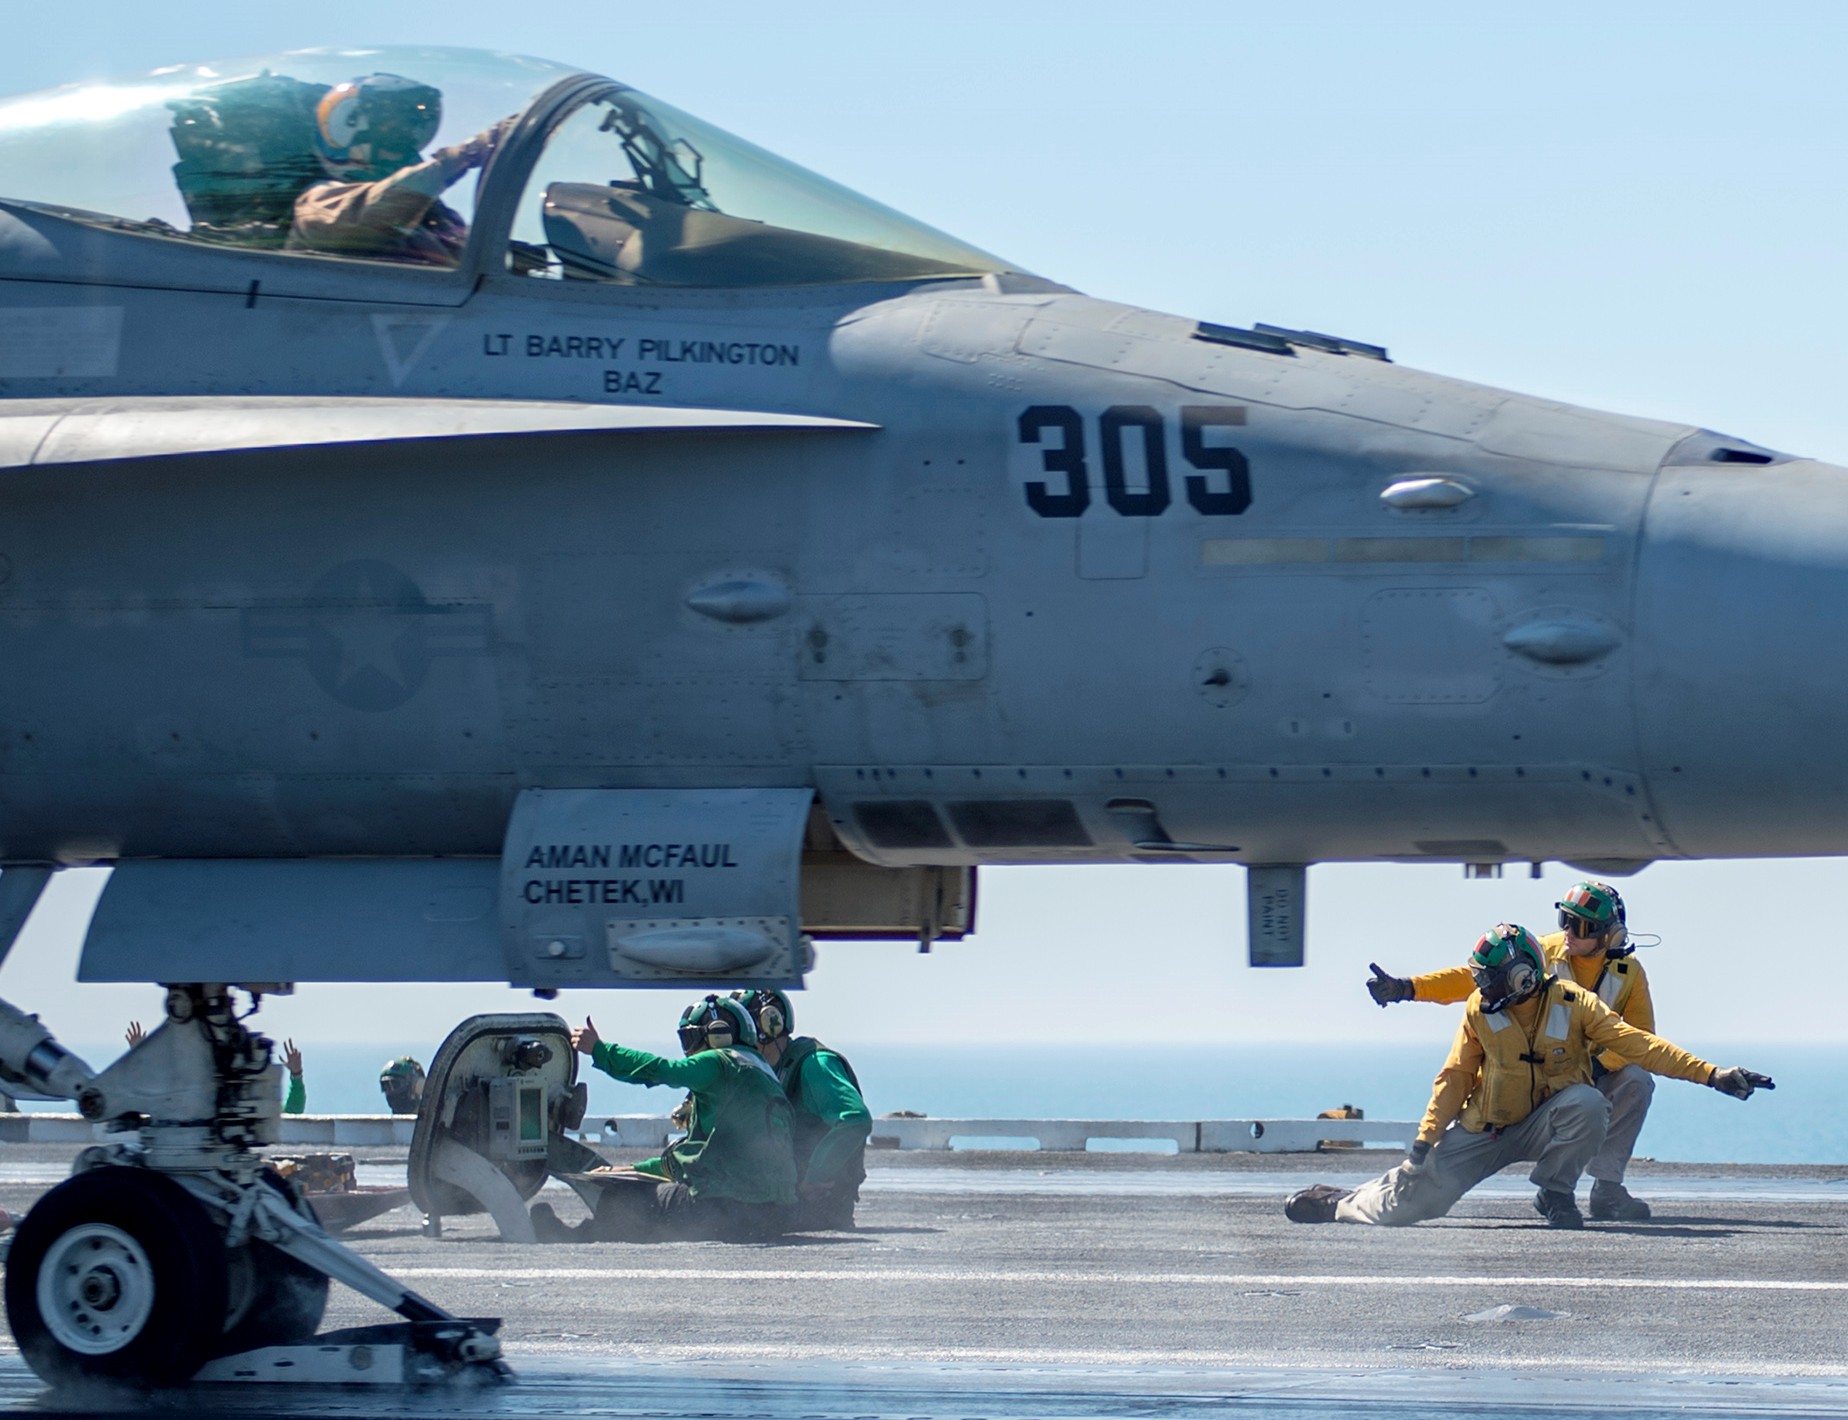 vfa-83 rampagers strike fighter squadron f/a-18c hornet cvw-7 uss harry s. truman cvn-75 59p